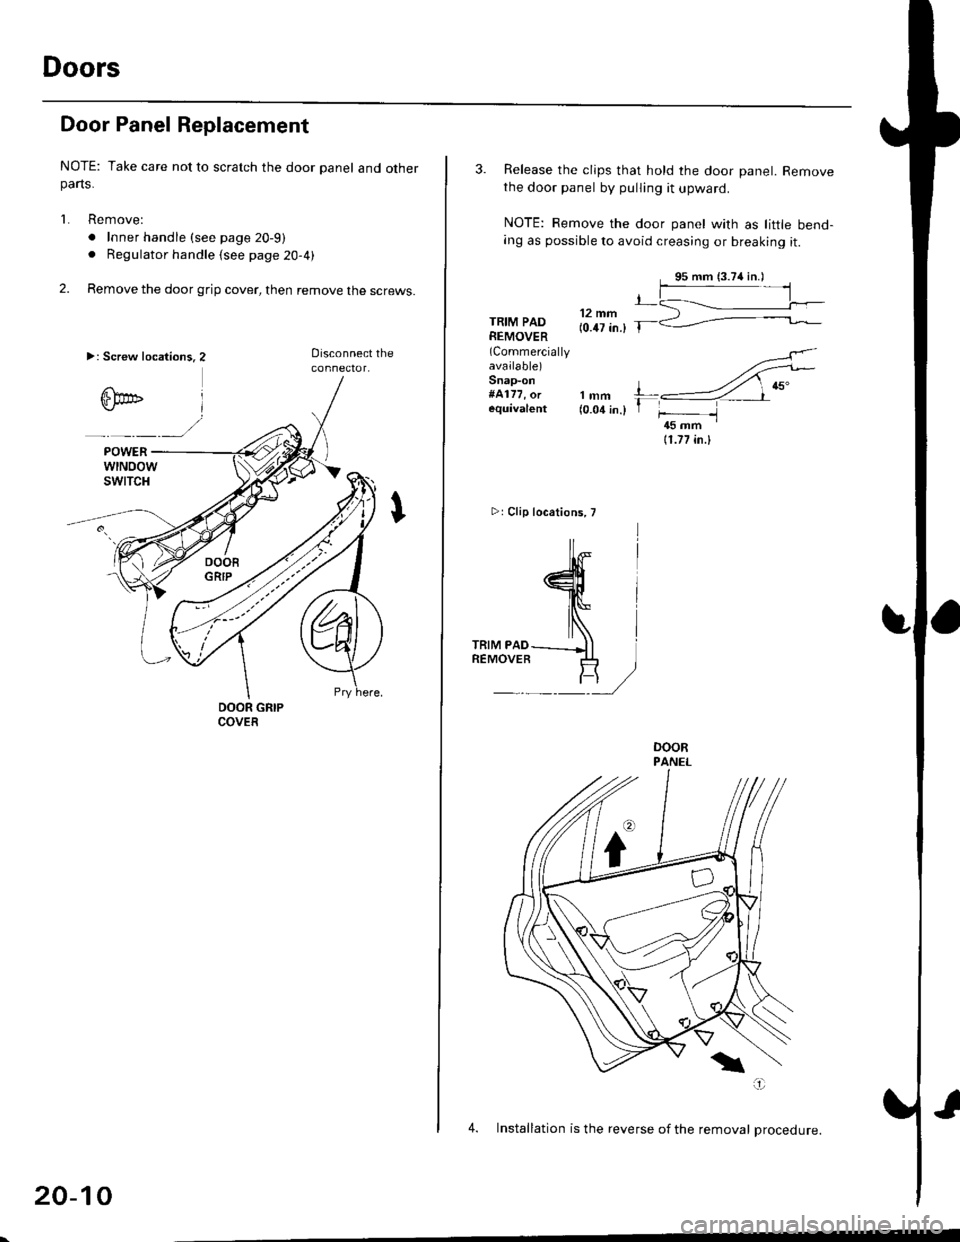 HONDA CIVIC 1997 6.G Workshop Manual Doors
Door Panel Replacement
NOTE: Take care not to scratch the door panel and otherparts.
1. Remove:
. Inner handle (see page 20-9)
. Regulator handle (see page 20-4)
2. Remove the door grip cover, t